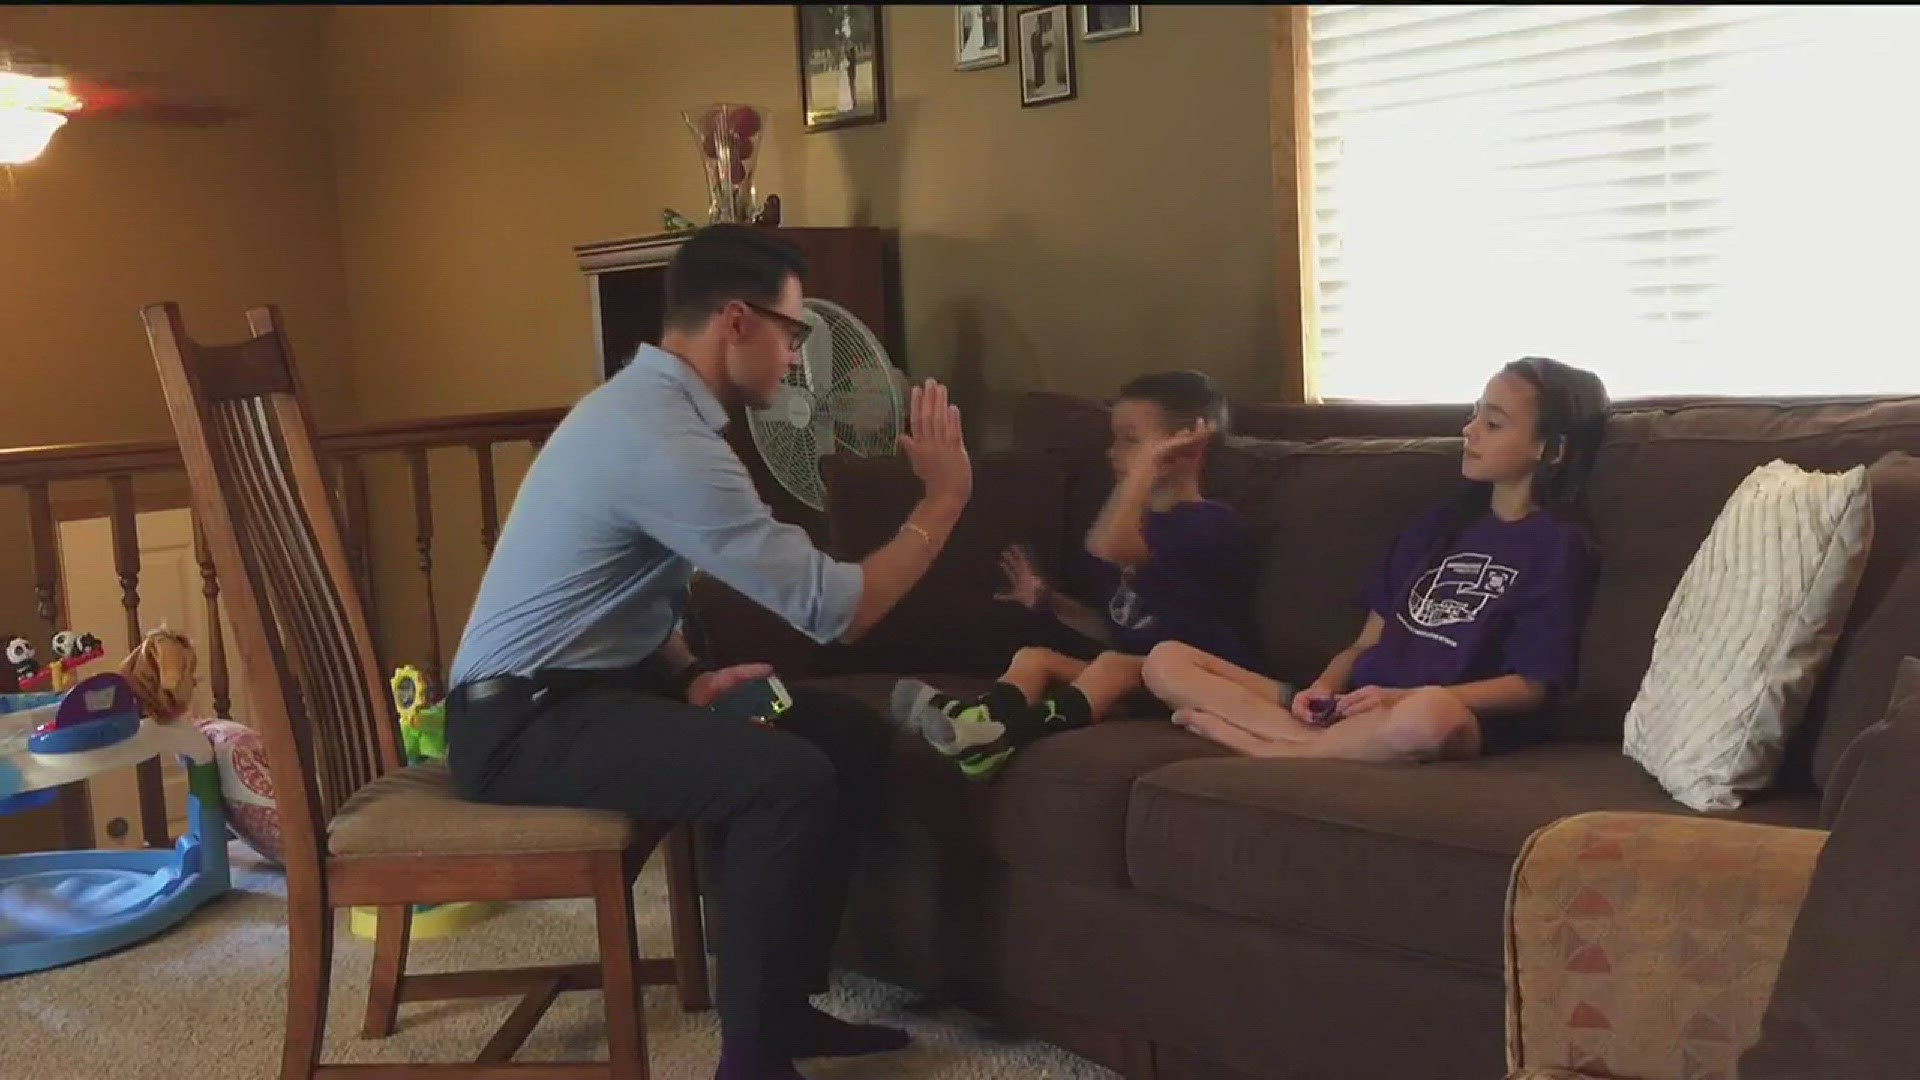 For the fifth straight year two kids will "Wage Hope" against pancreatic cancer.